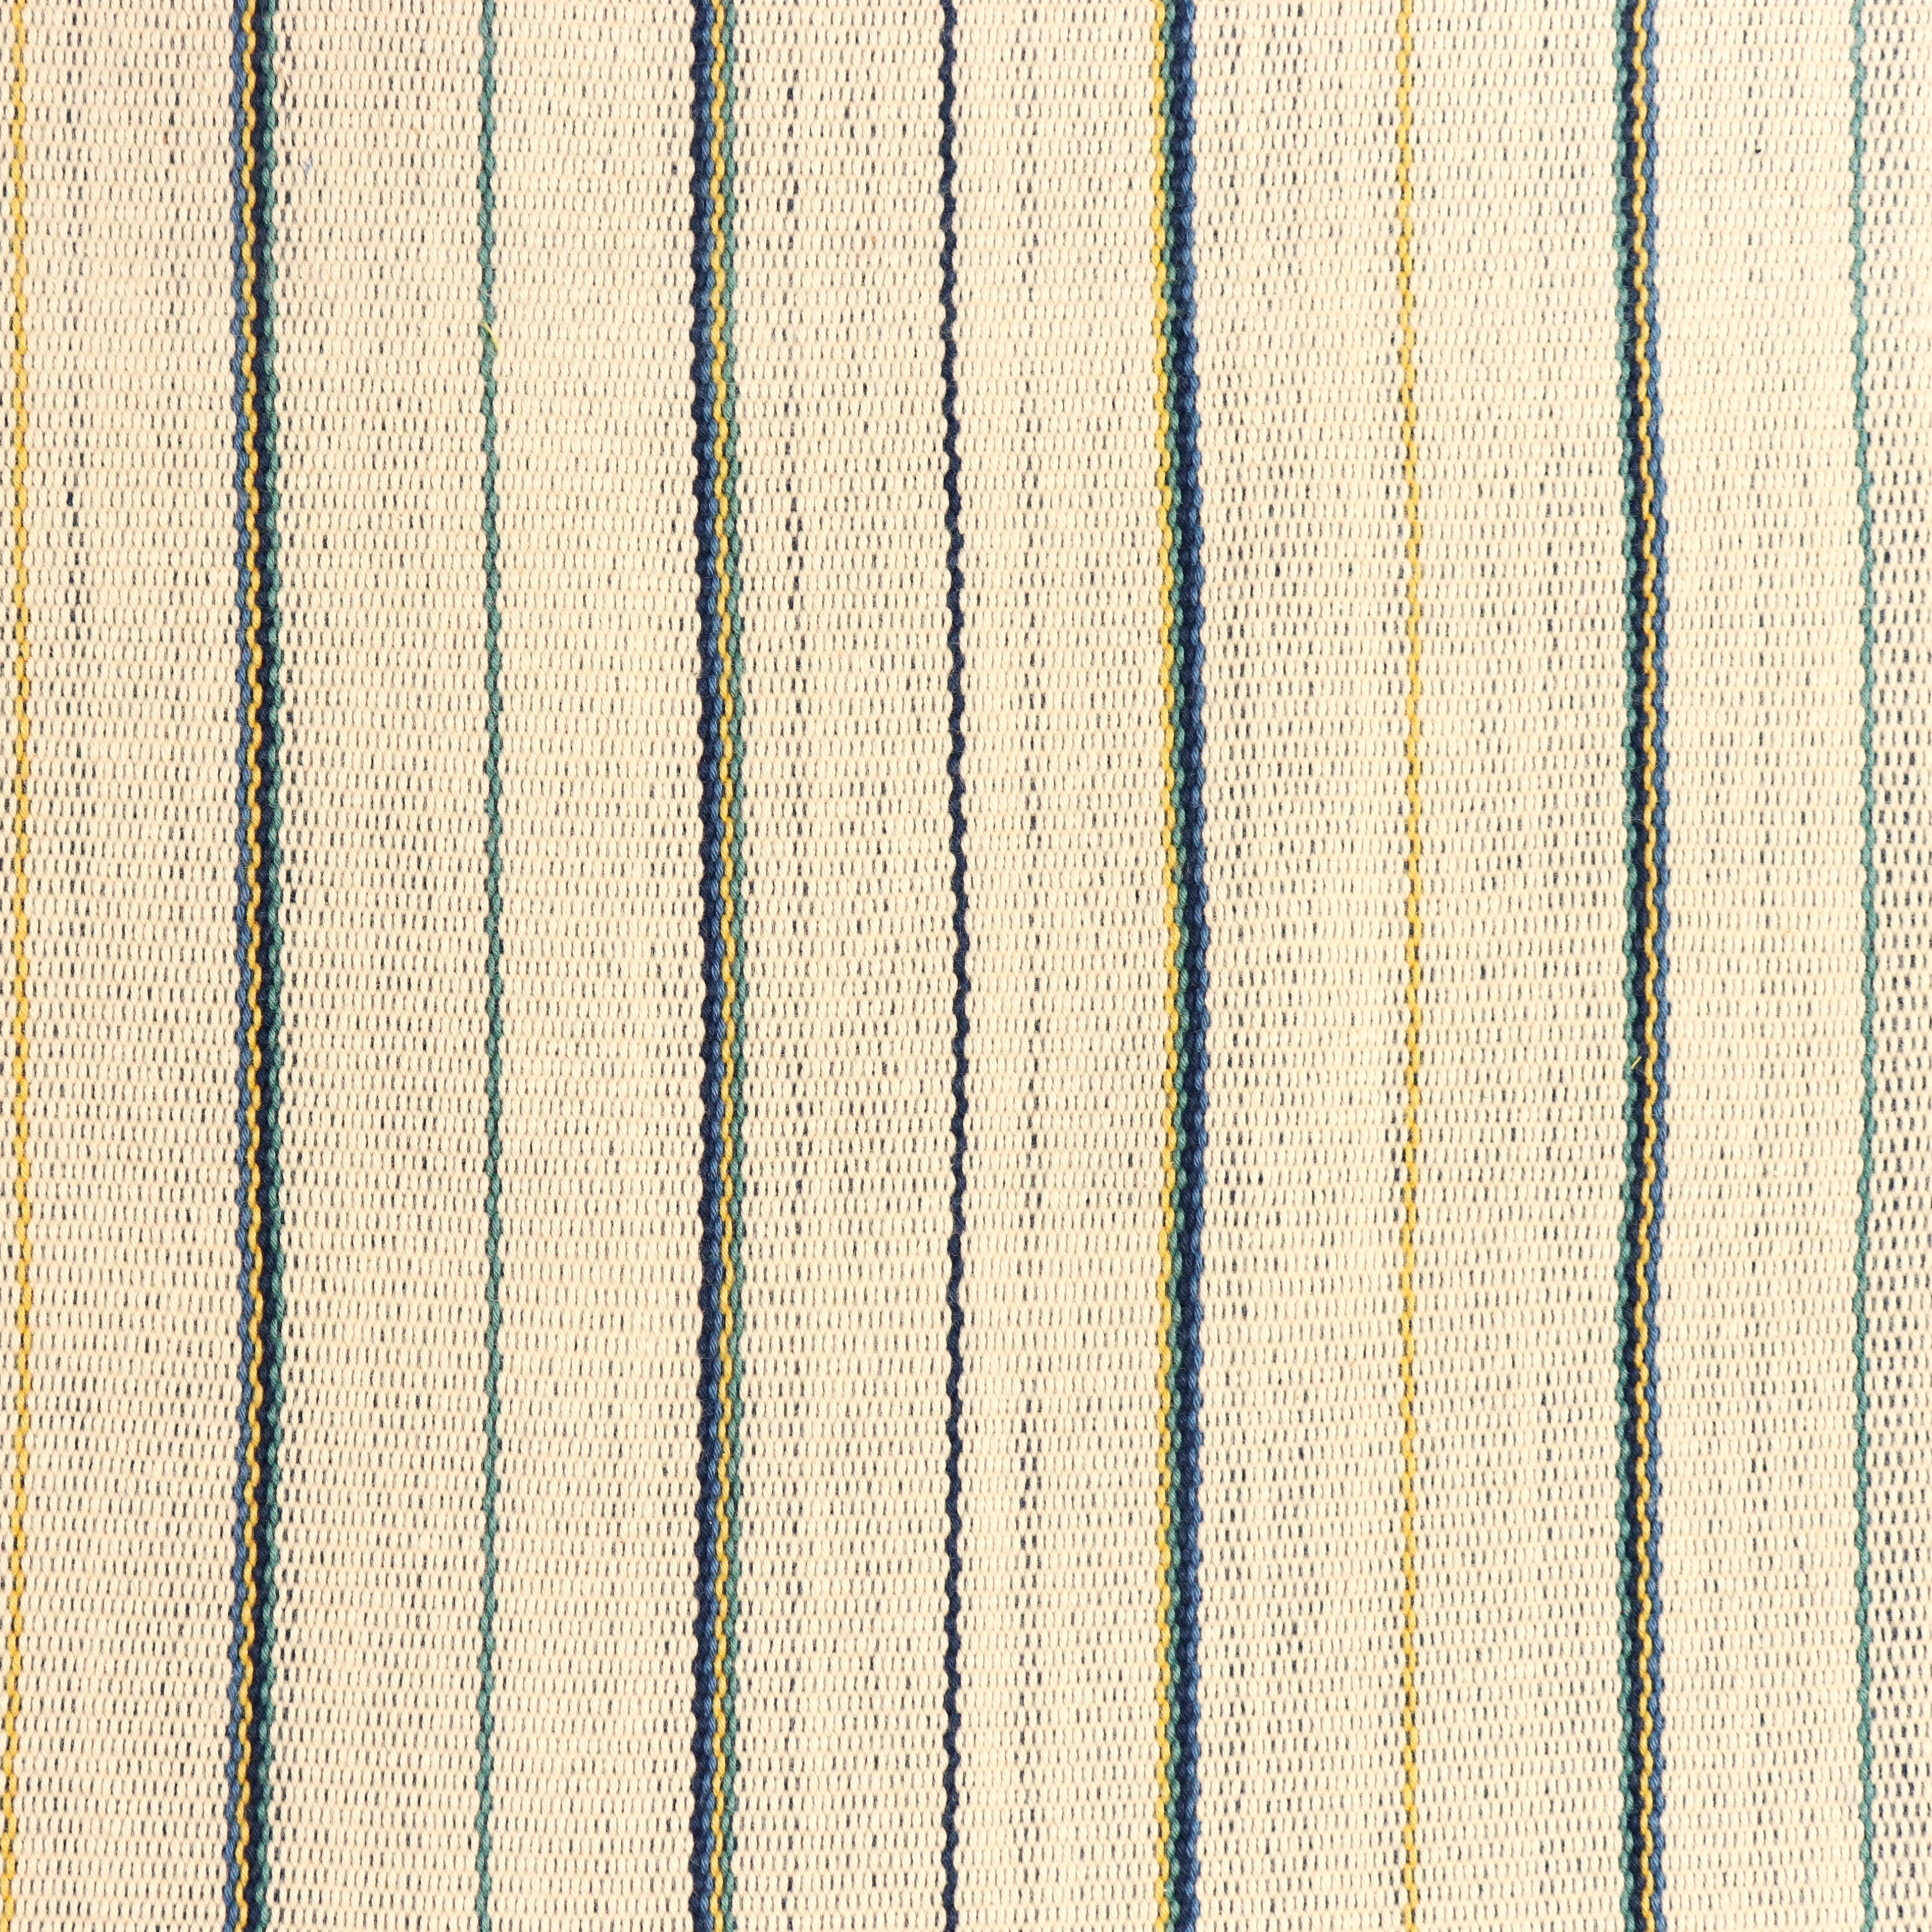 Detail of a hand-woven cotton fabric in an irregular stripe pattern in blue, yellow and green on a cream field.